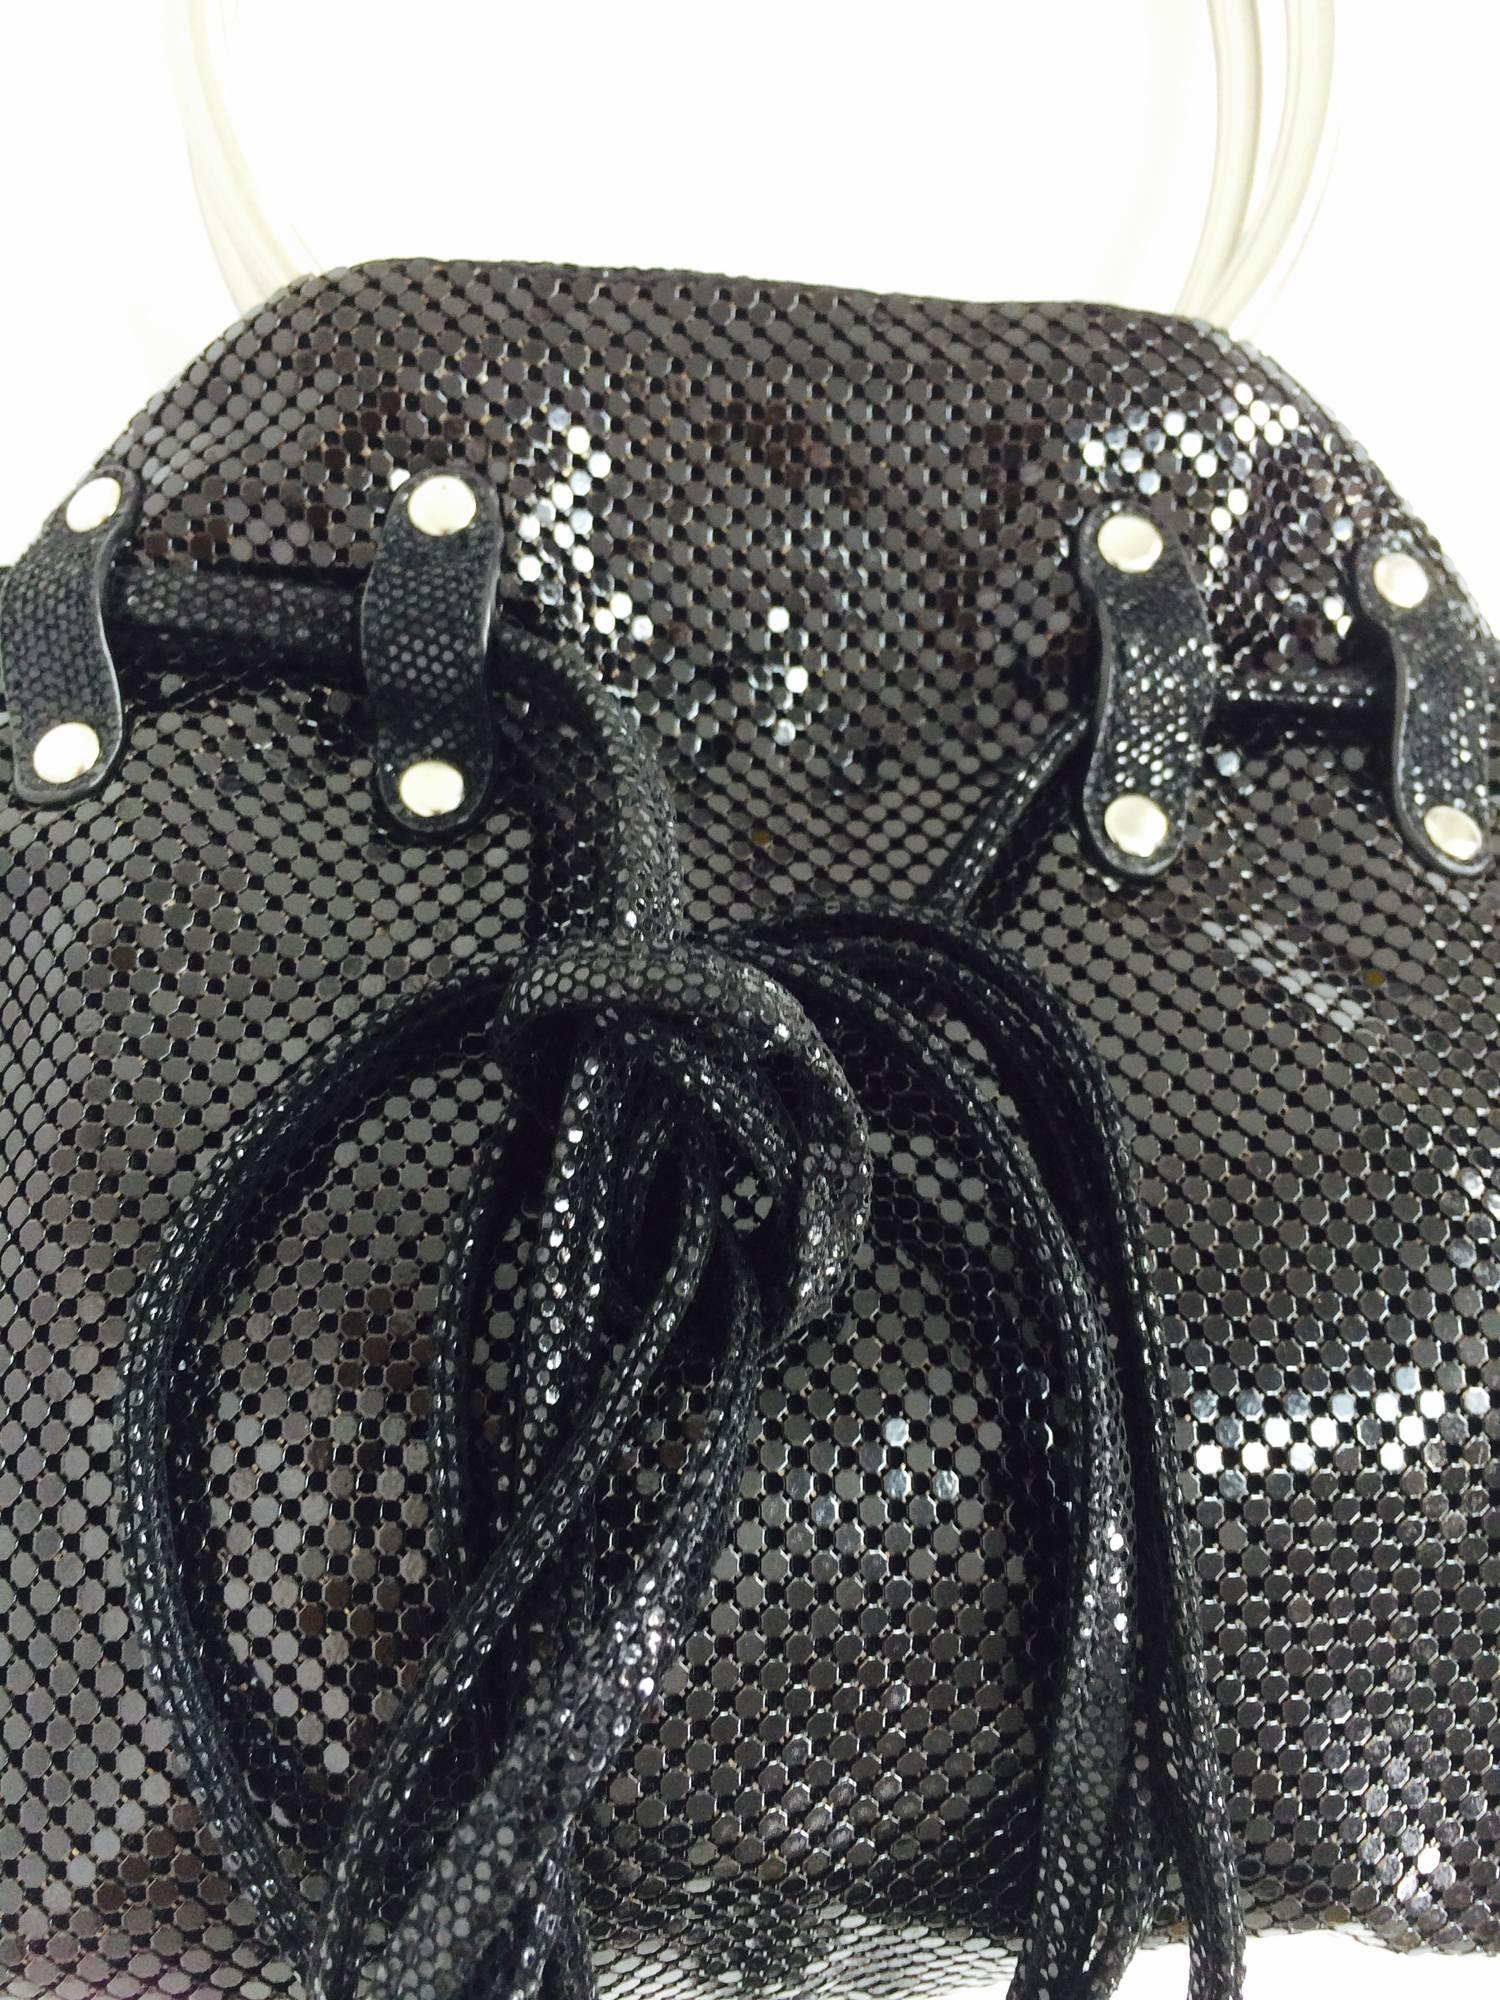 Whiting & Davis black metal mesh handbag with silver ring handles...Great bag has silver studs and suede ties to adjust bag...Closes with a hidden magnetic closure...Fully lined in logo satin...Looks barely, if ever used...
Measurements